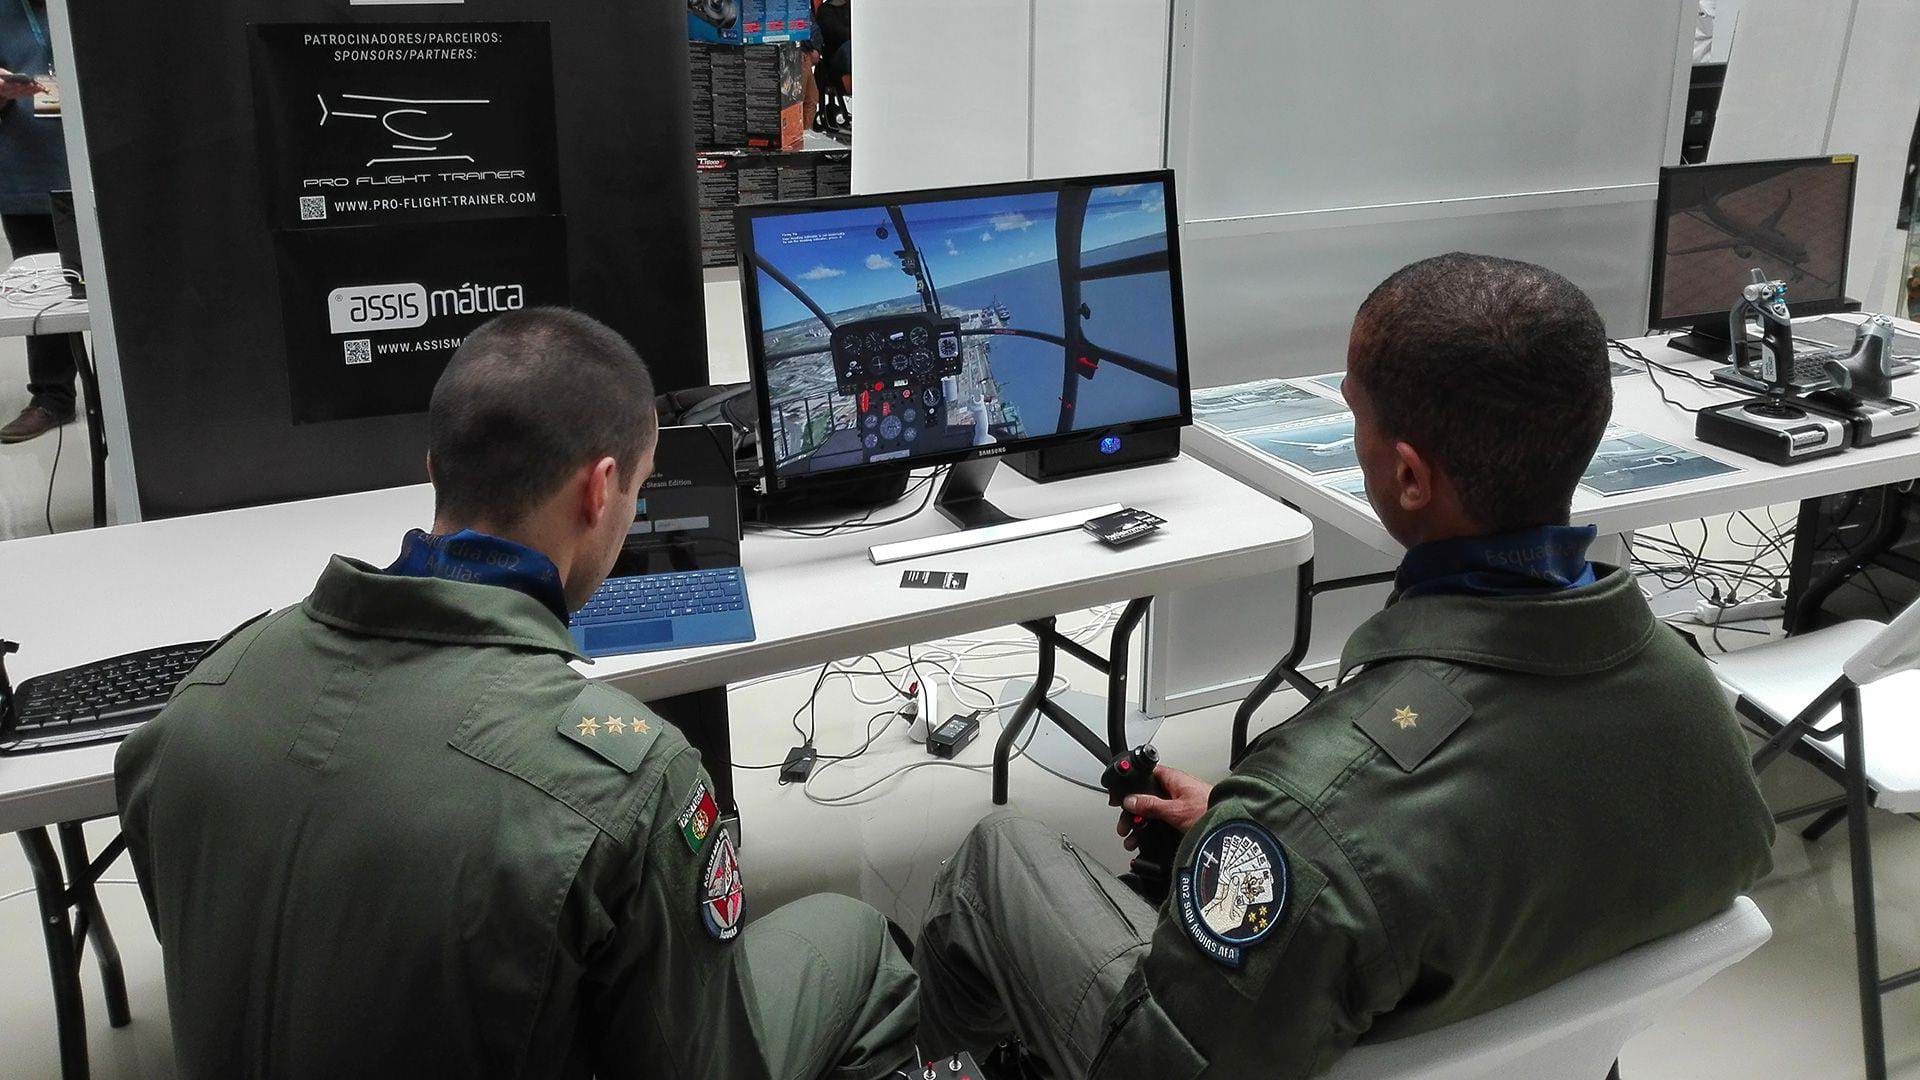 People trying helicopter flight simulators